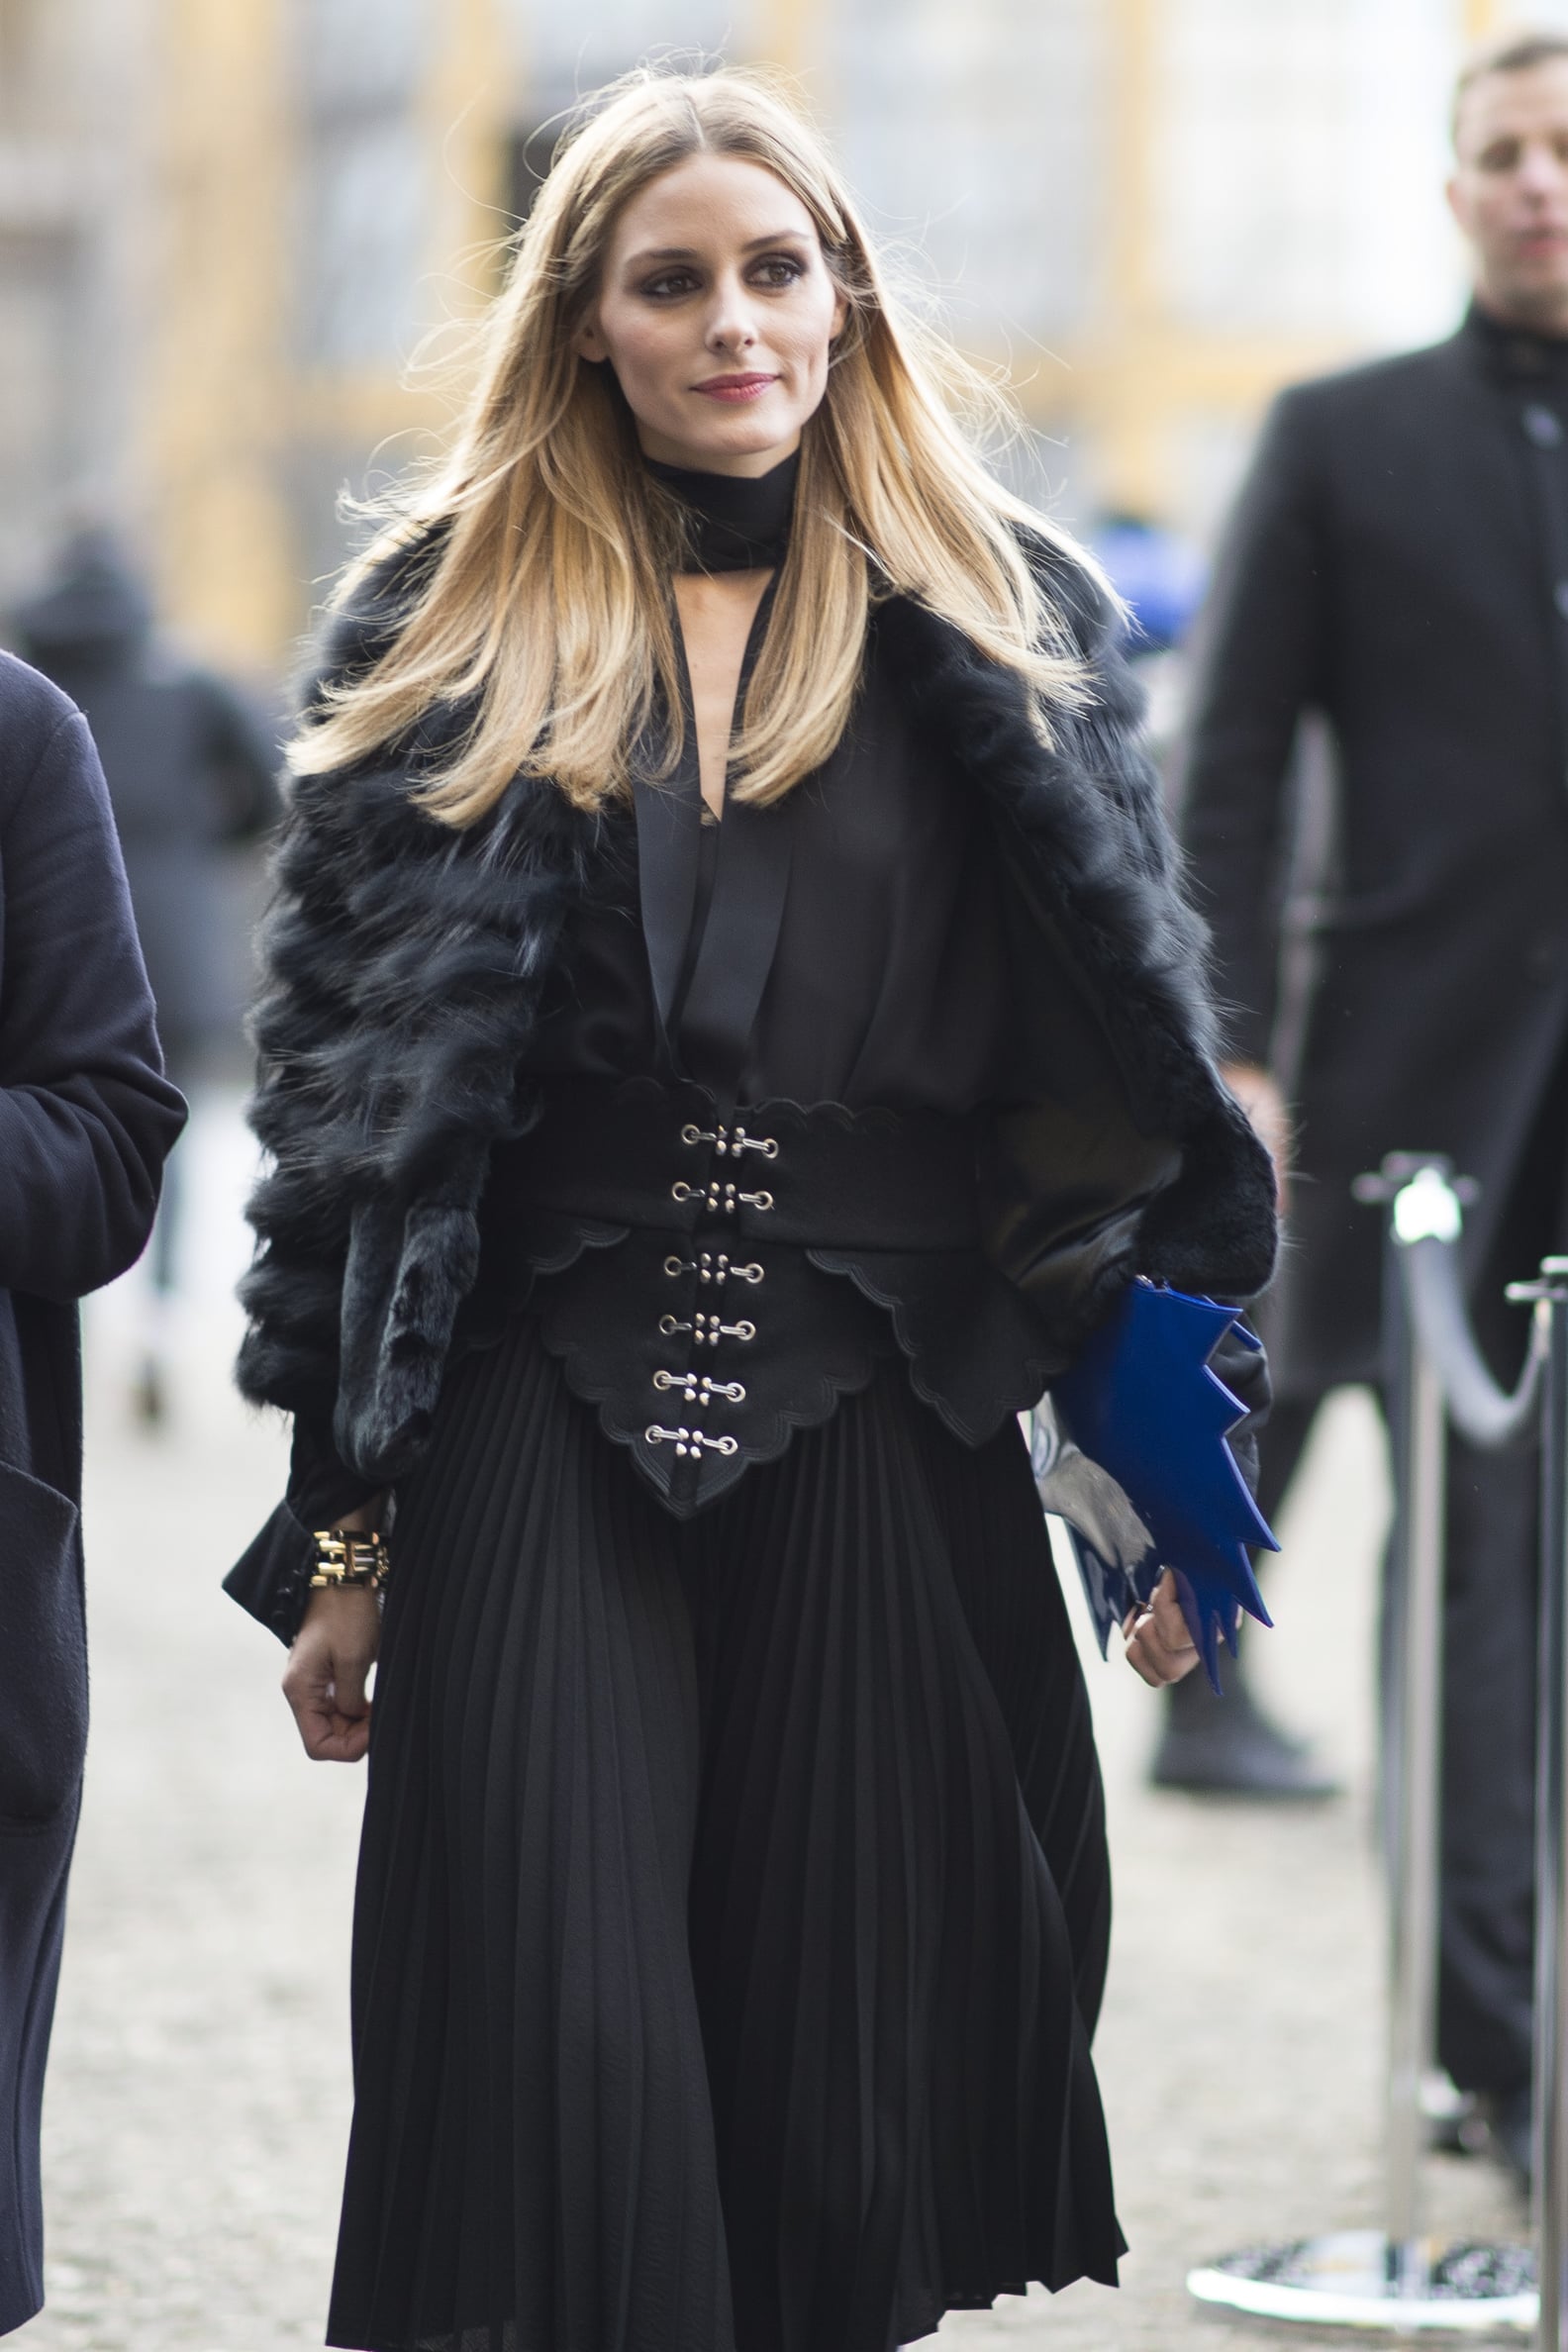 How to Make Your Black Outfit Stand Out | POPSUGAR Fashion